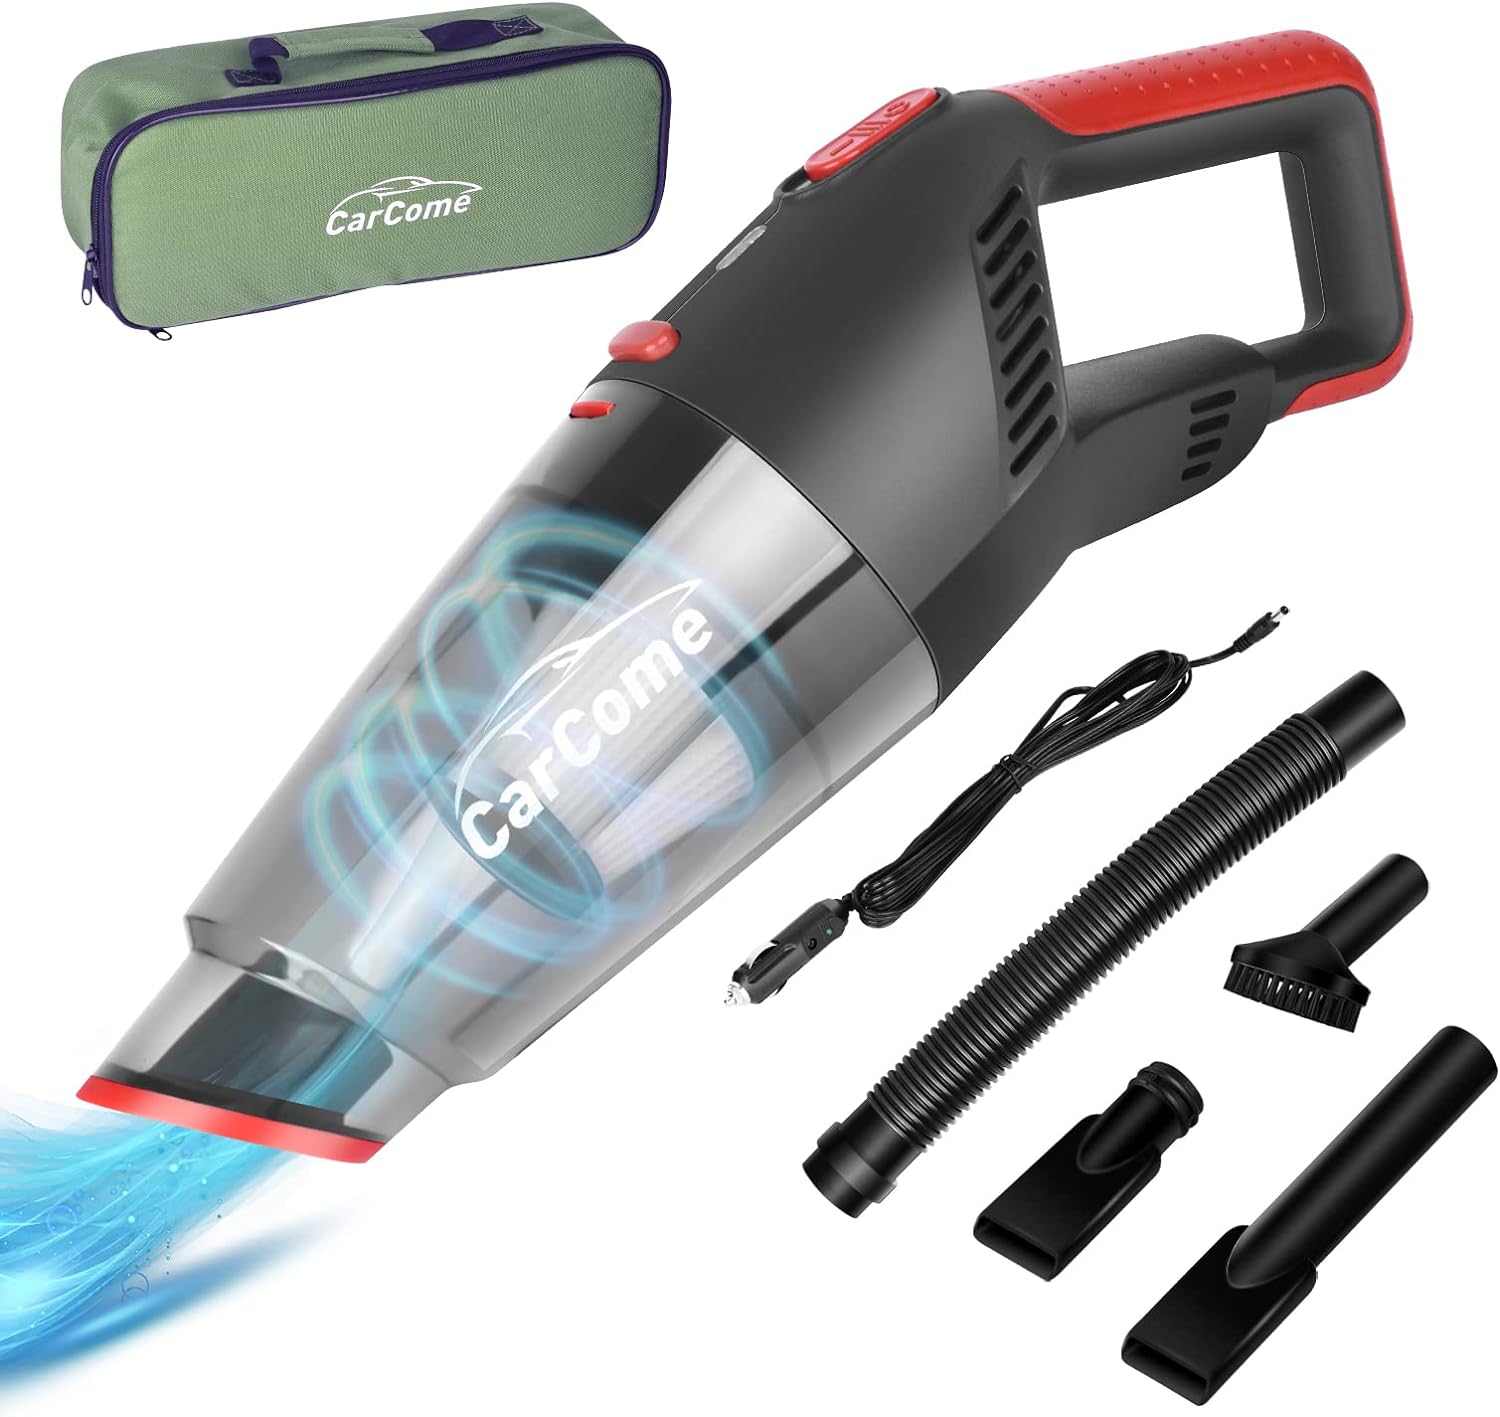 Carcome High Power Car Vacuum Cleaner,Portable Vacuum Cleaner, 6000PA Suction, Wet and Dry Car Vacuum Cleaner with 10FT Cord, L